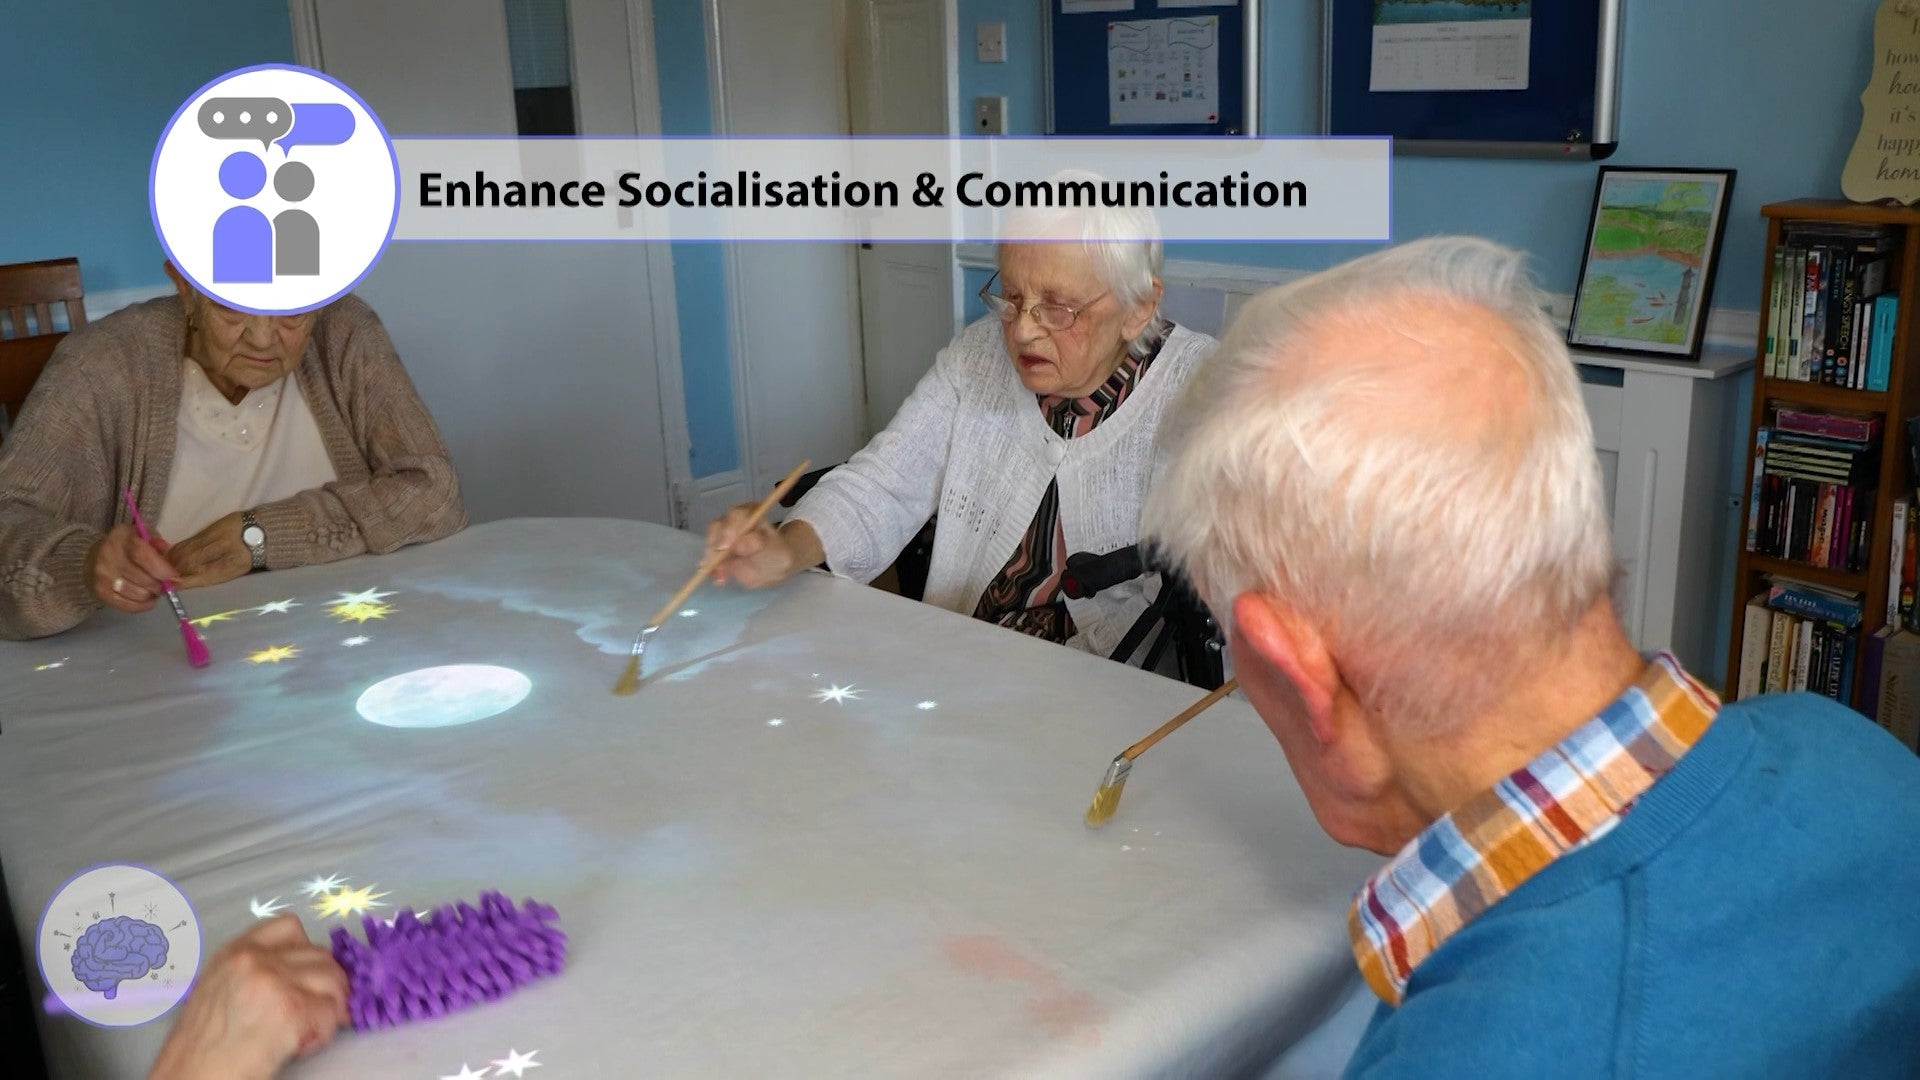 The Wellbeing Suite Socialization